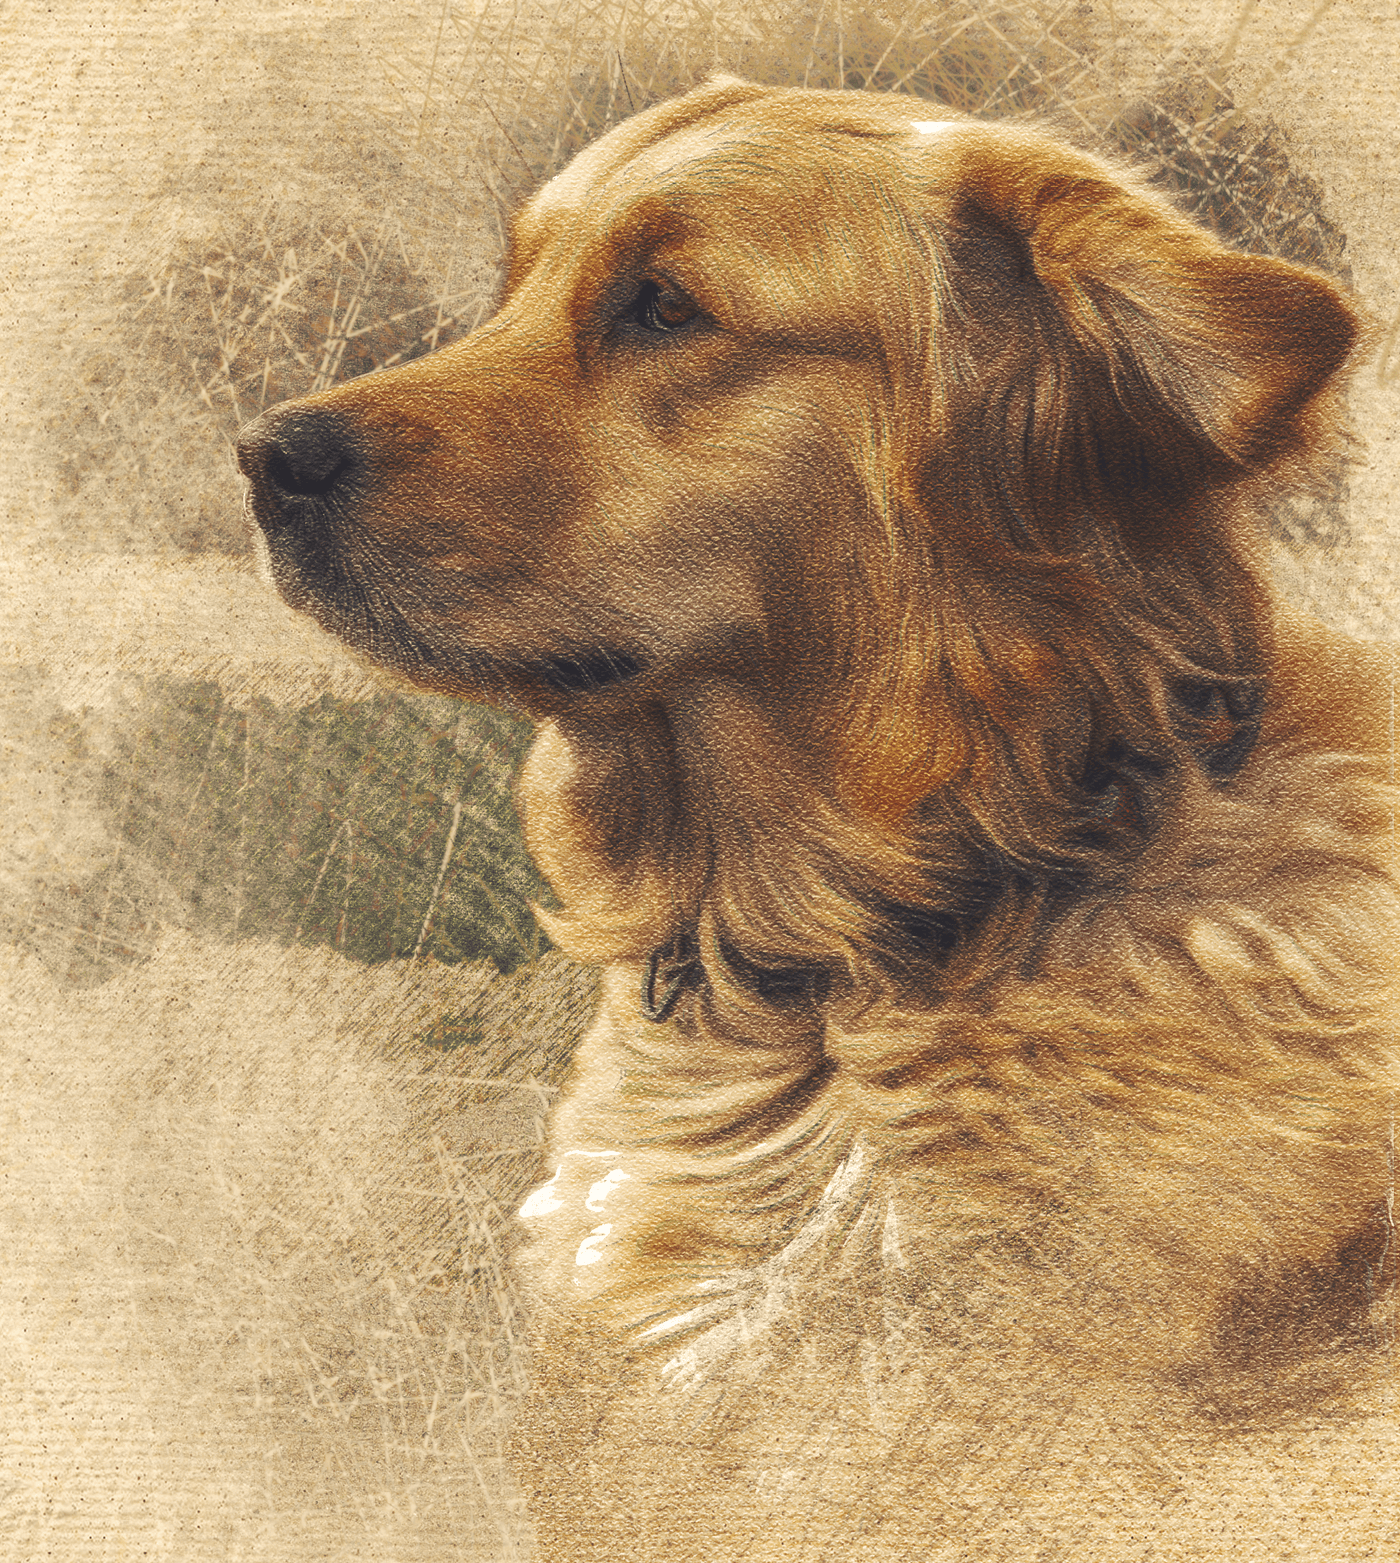 Colored Pencil Dog Portraits of an adorable  hairy brown furred dog